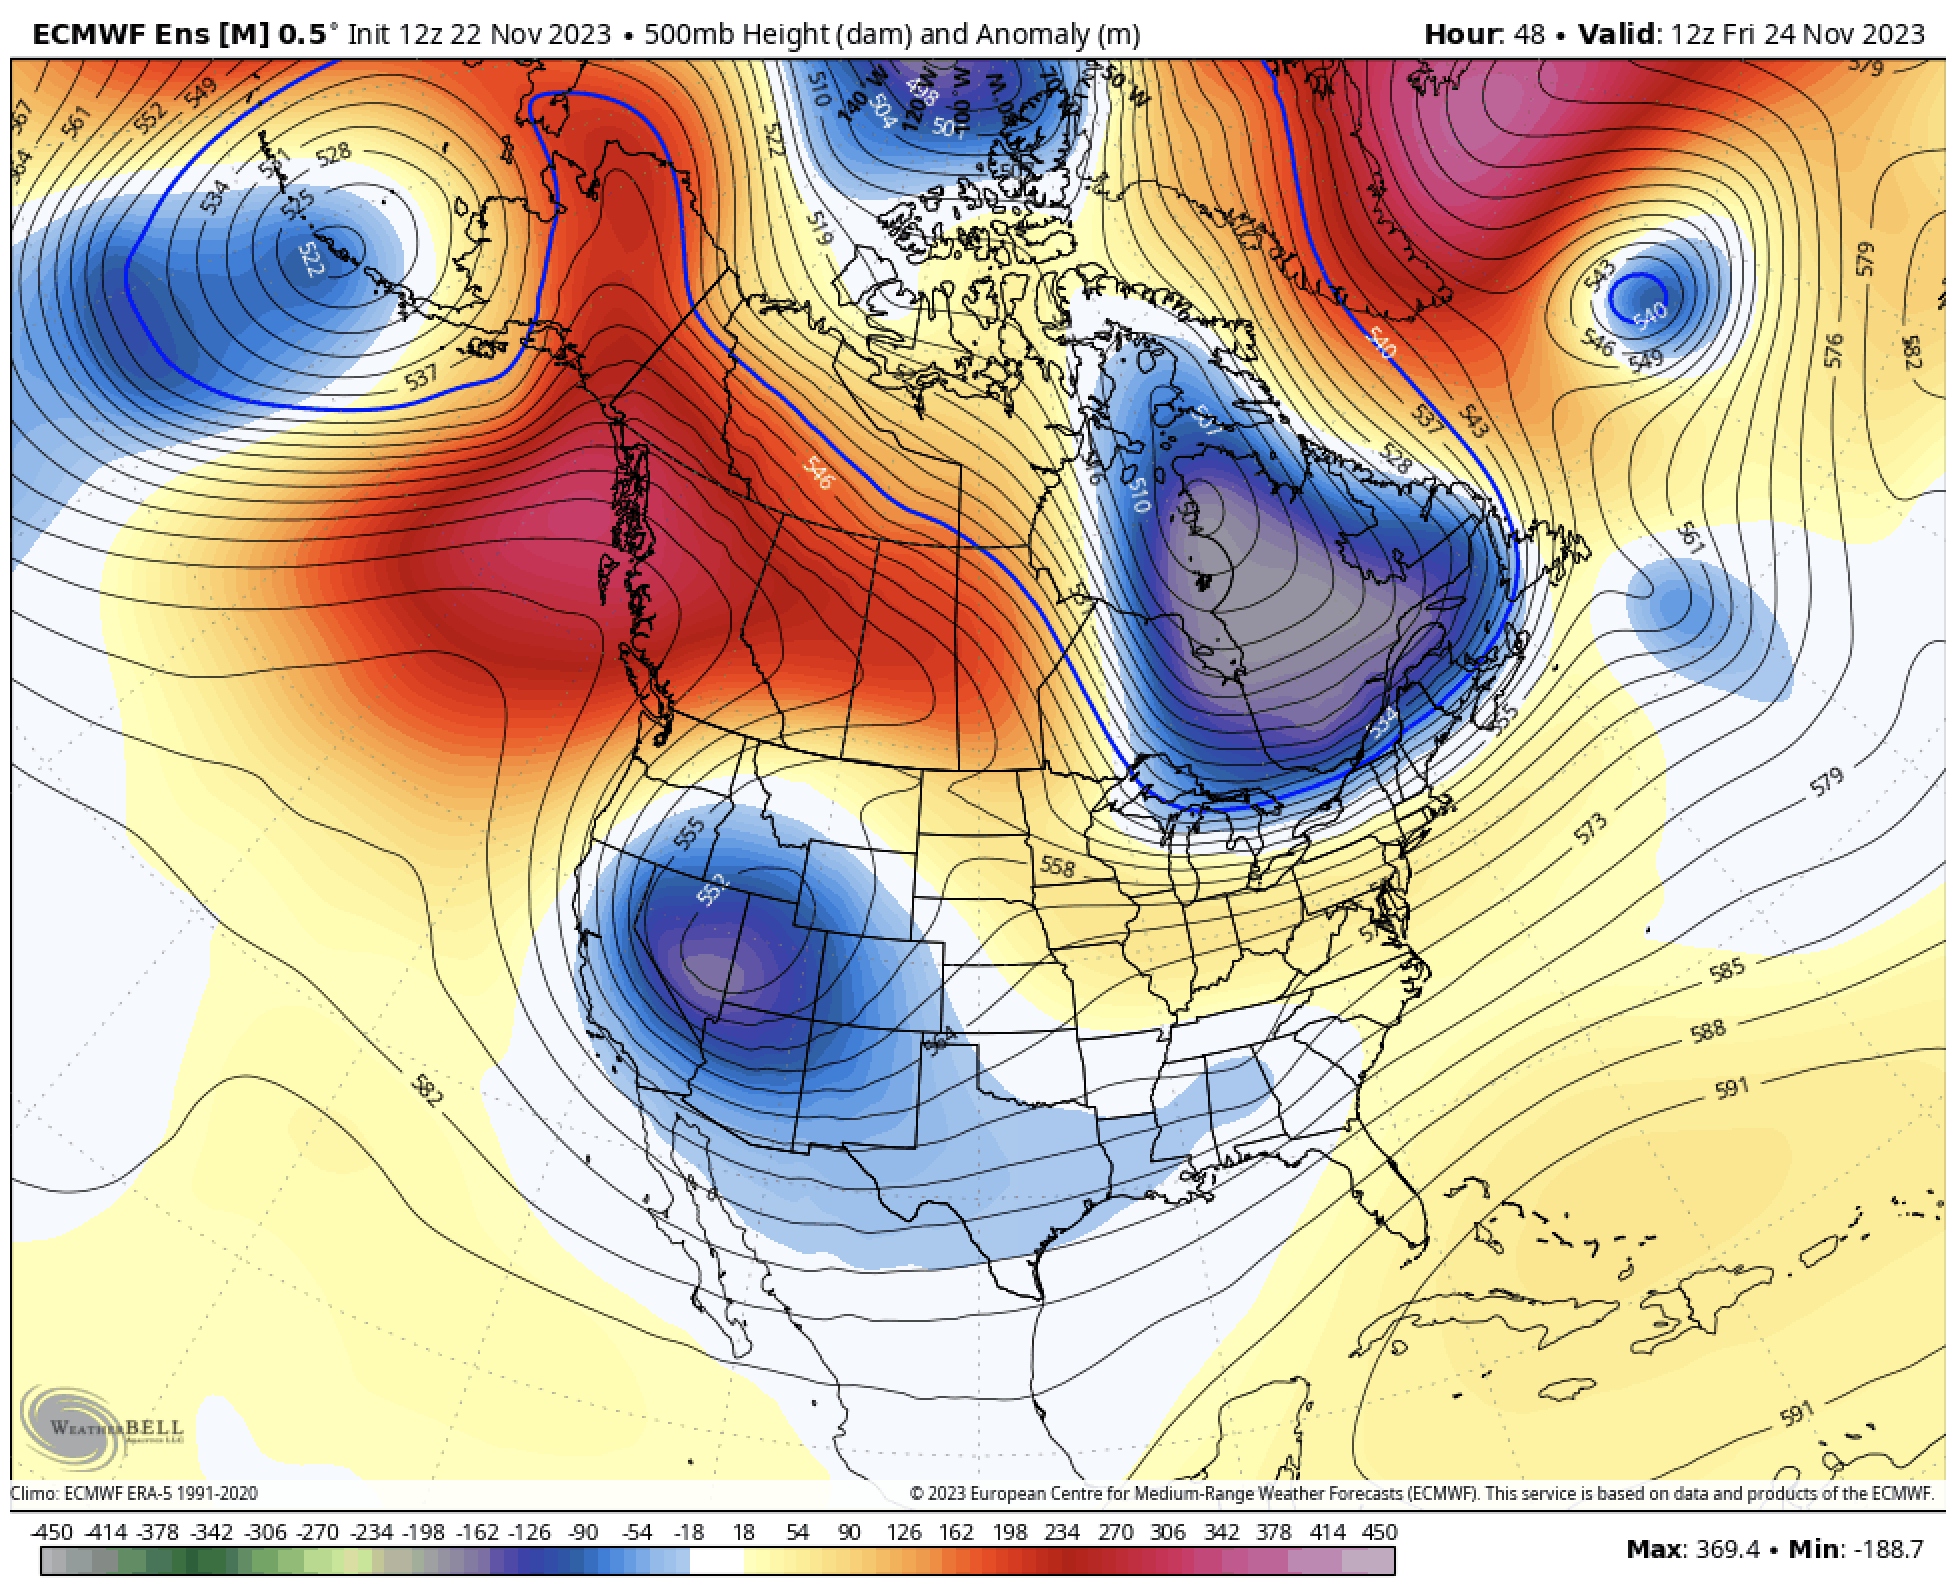 By Friday there is a Low in the Great Basin - Mammoth Weather Image